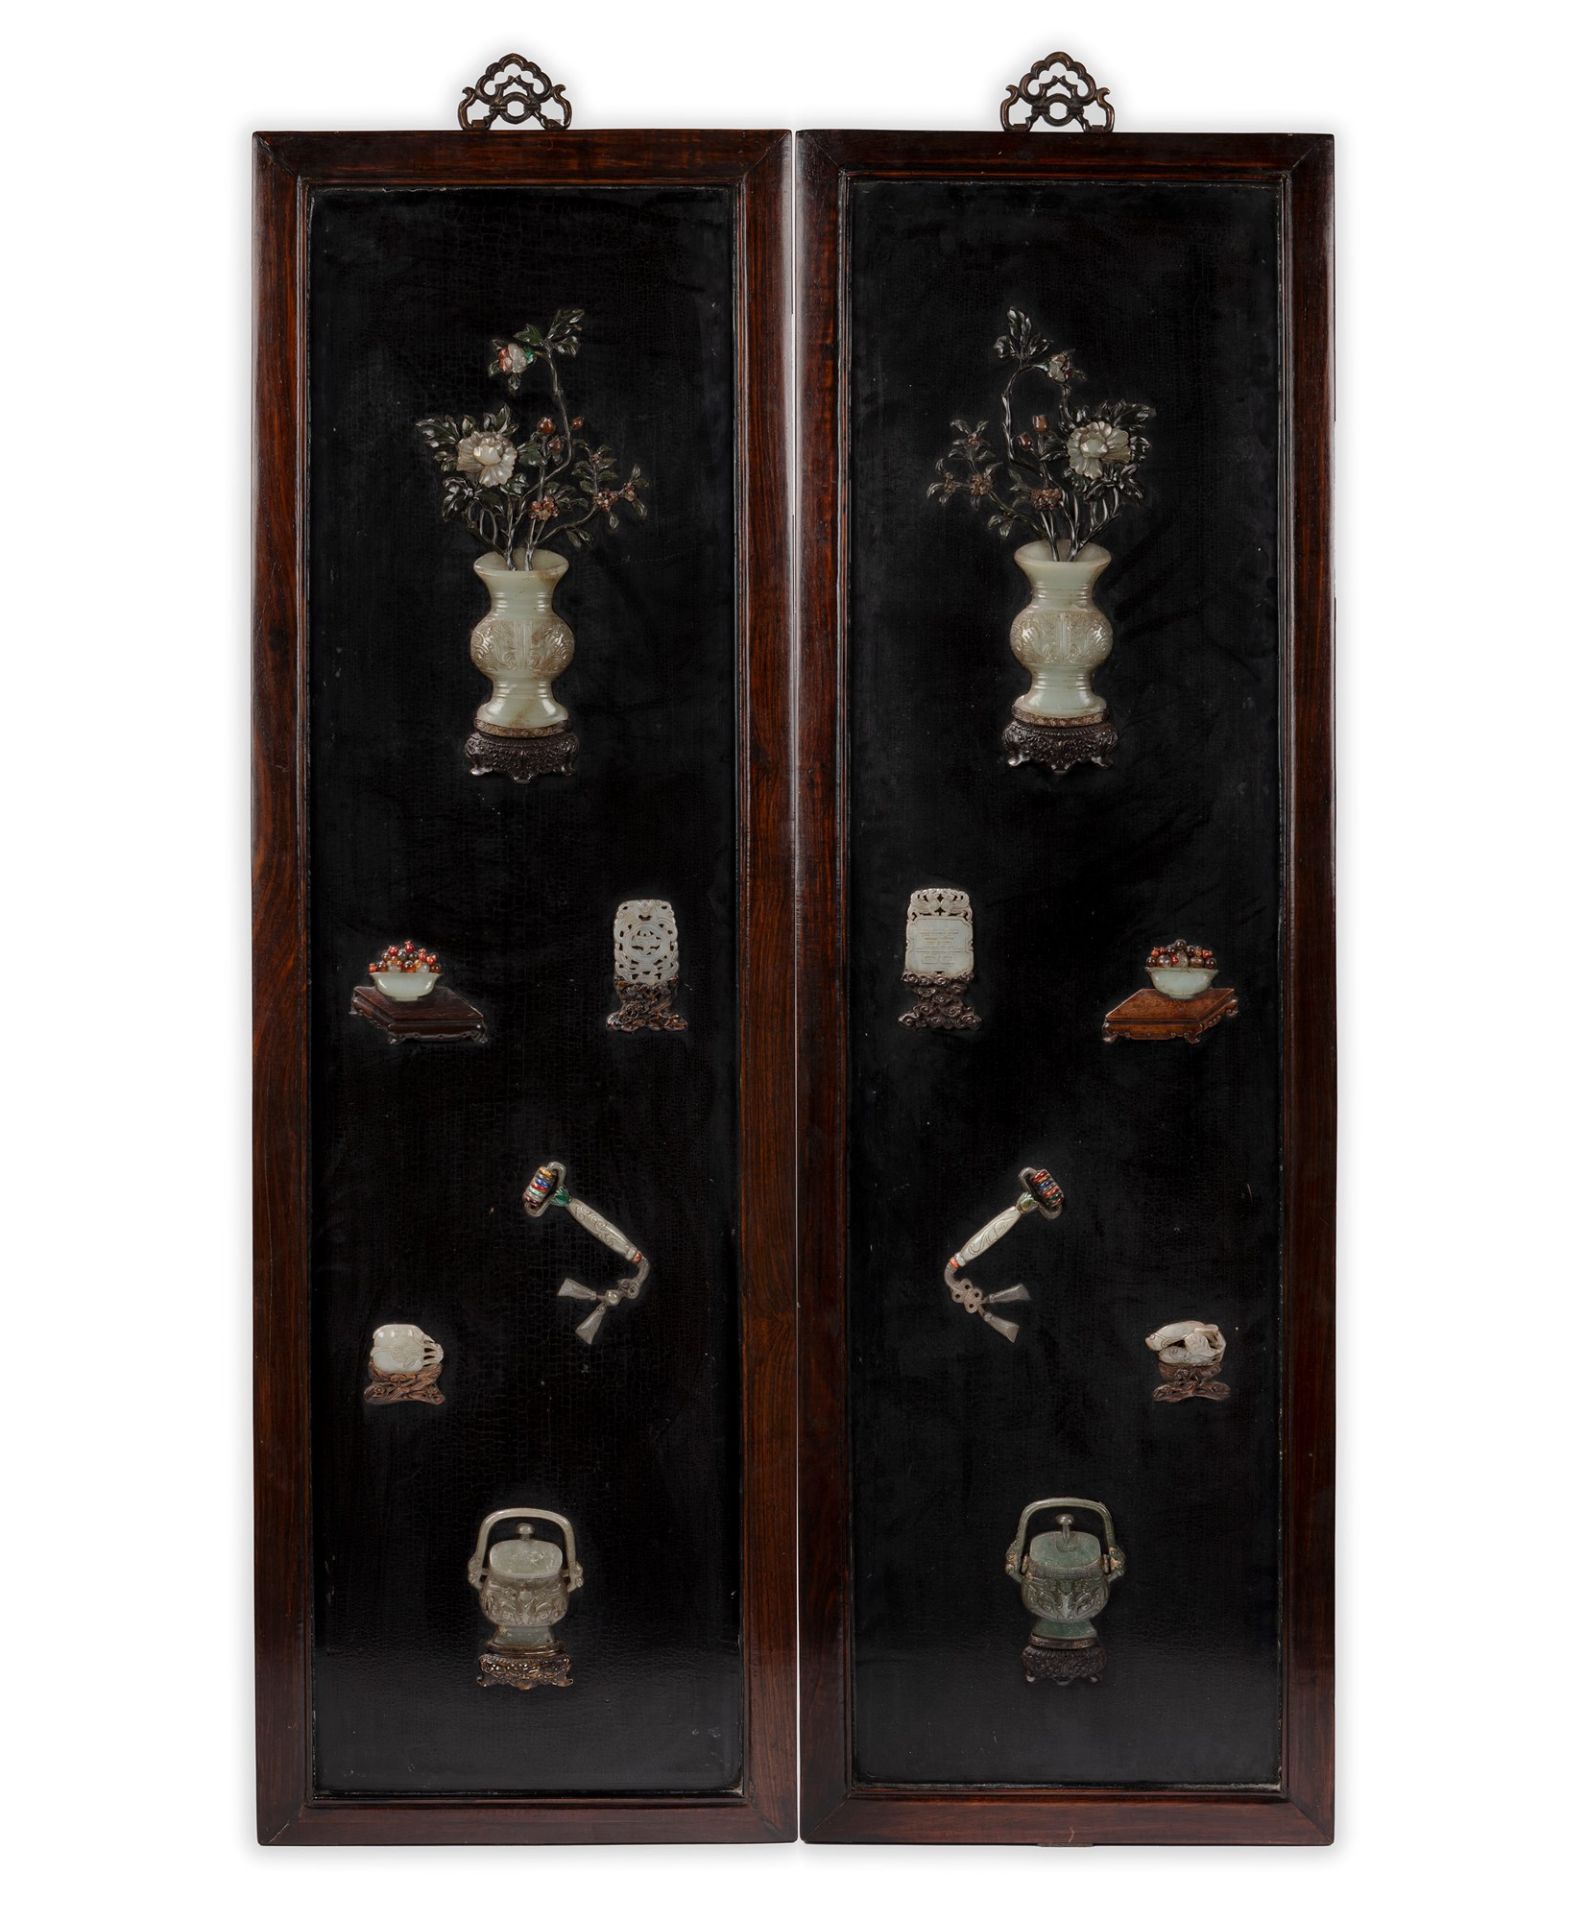 A PAIR OF LACQUERED WOOD PANELS AND JADE CARVINGS, China, early 20th century